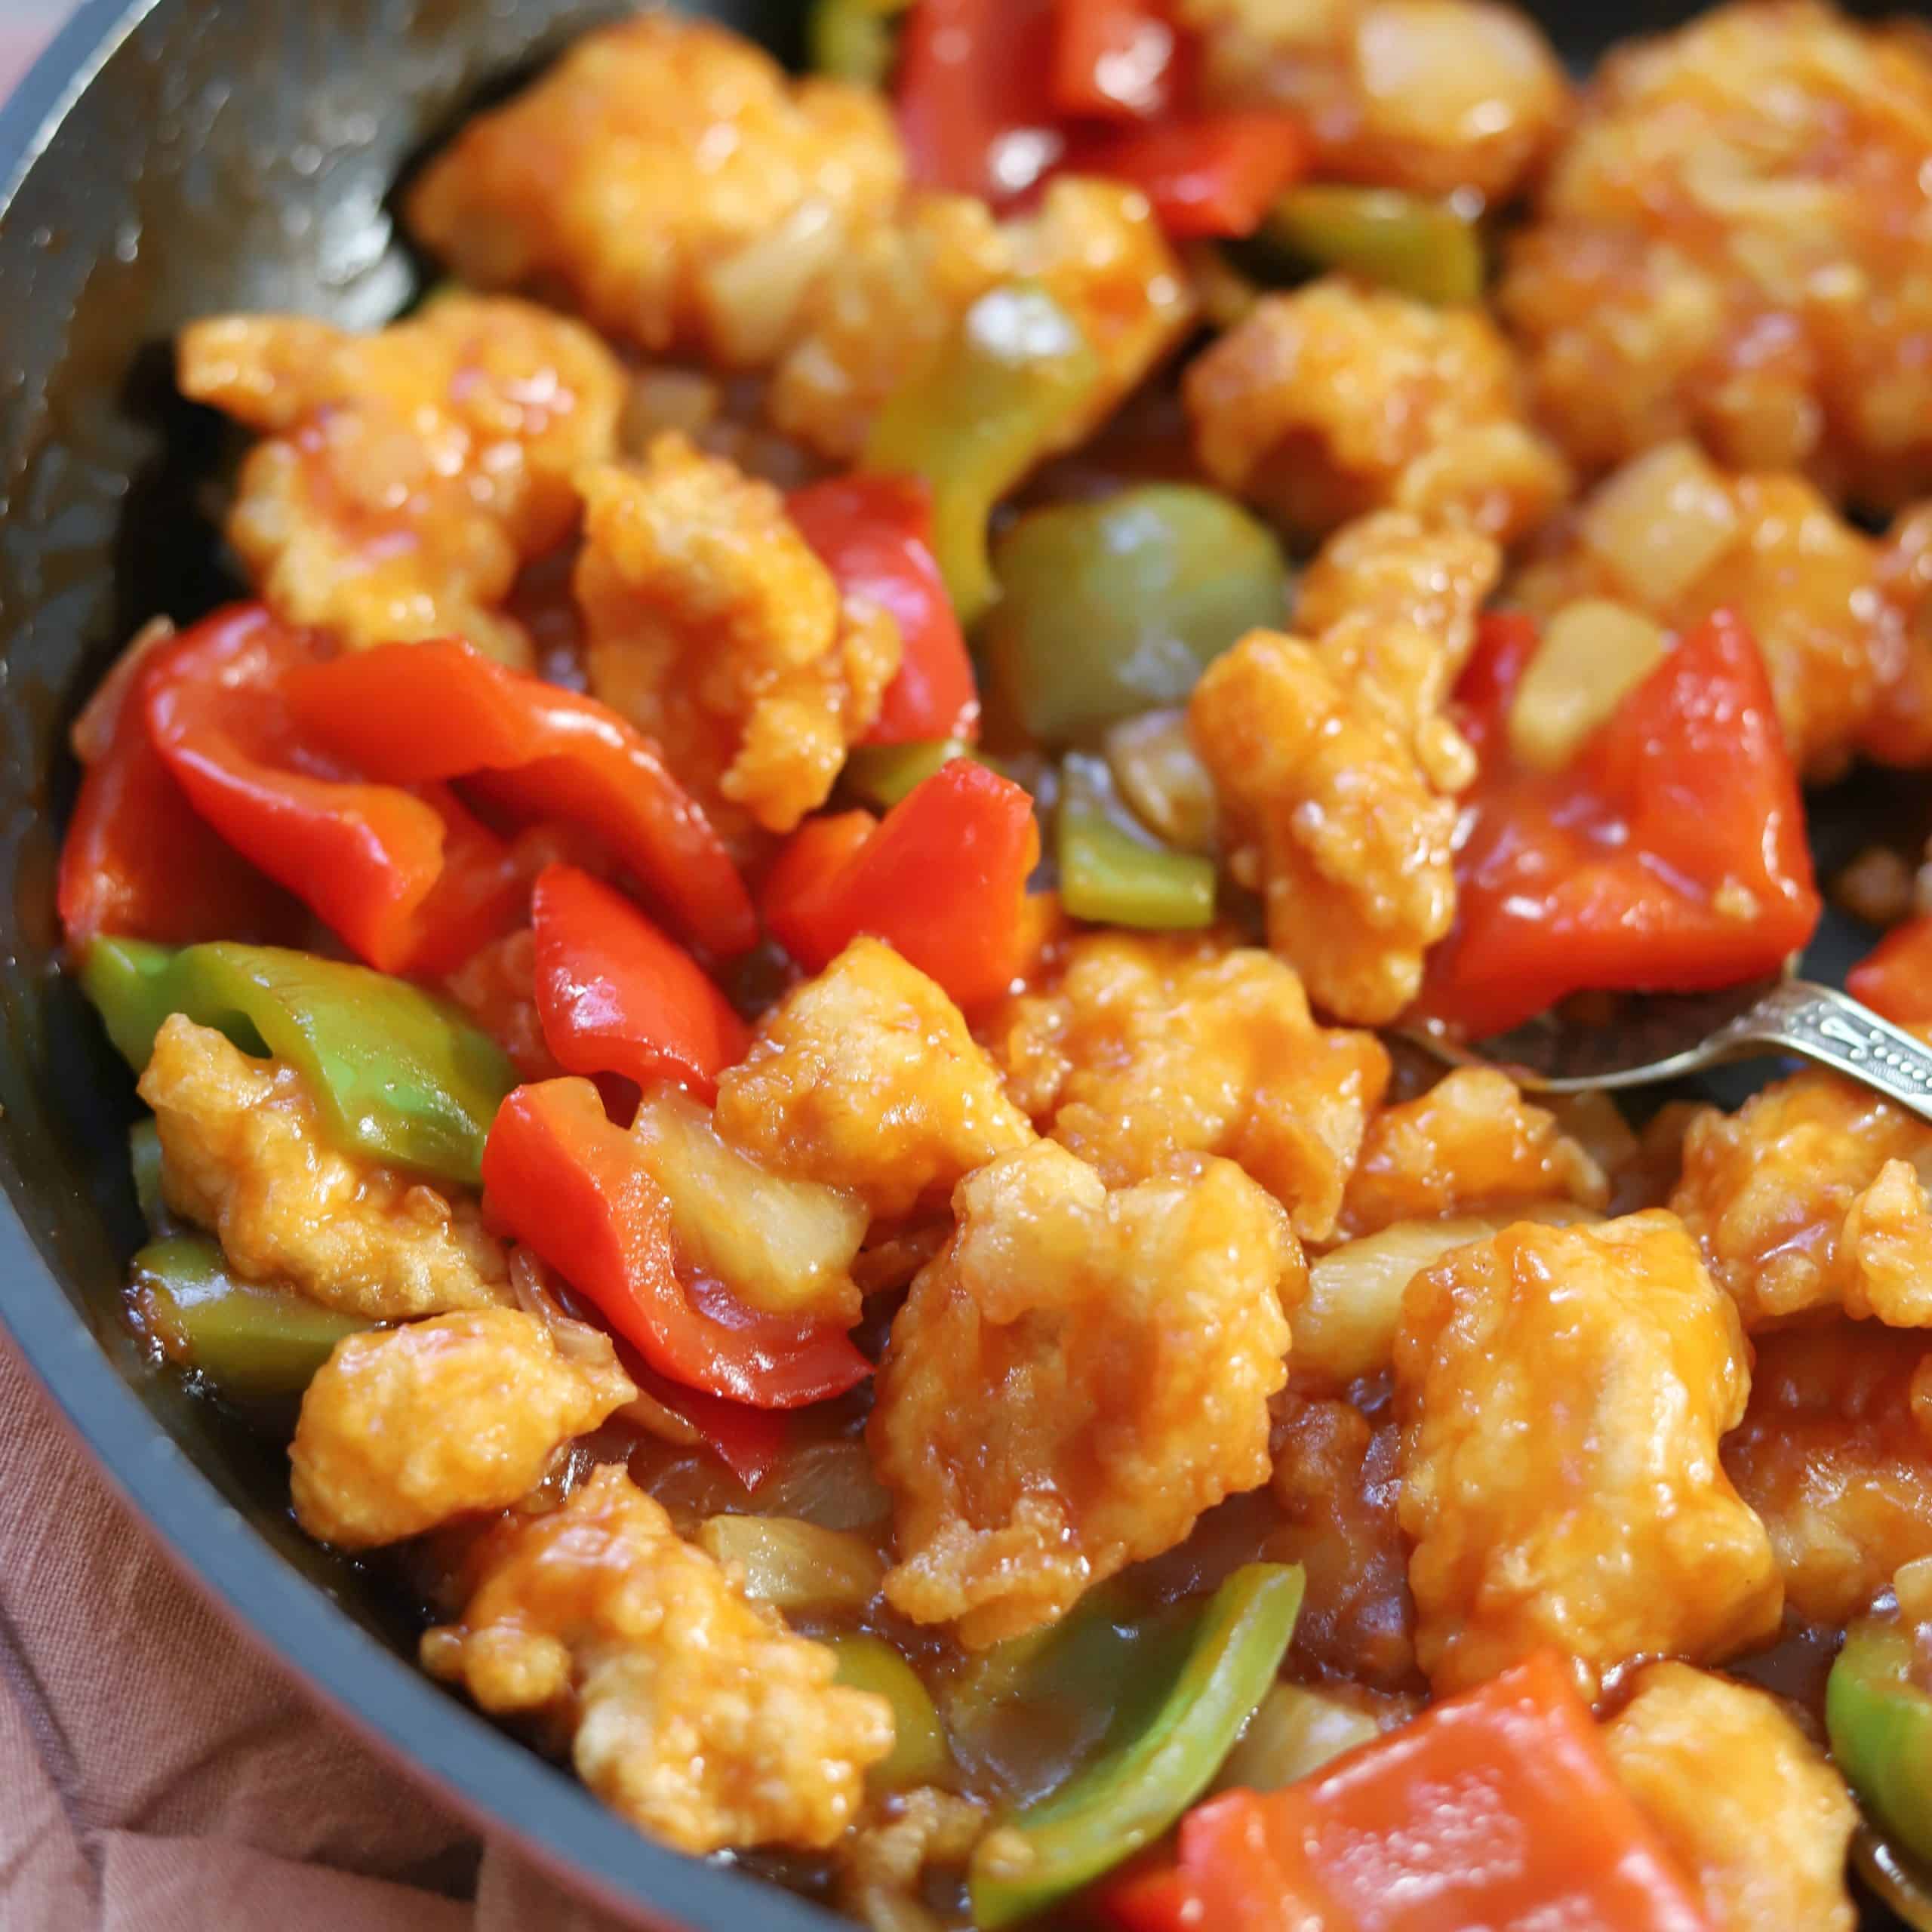 Gluten Free Sweet and Sour Chicken - Sweet and Sour Sauce Recipe